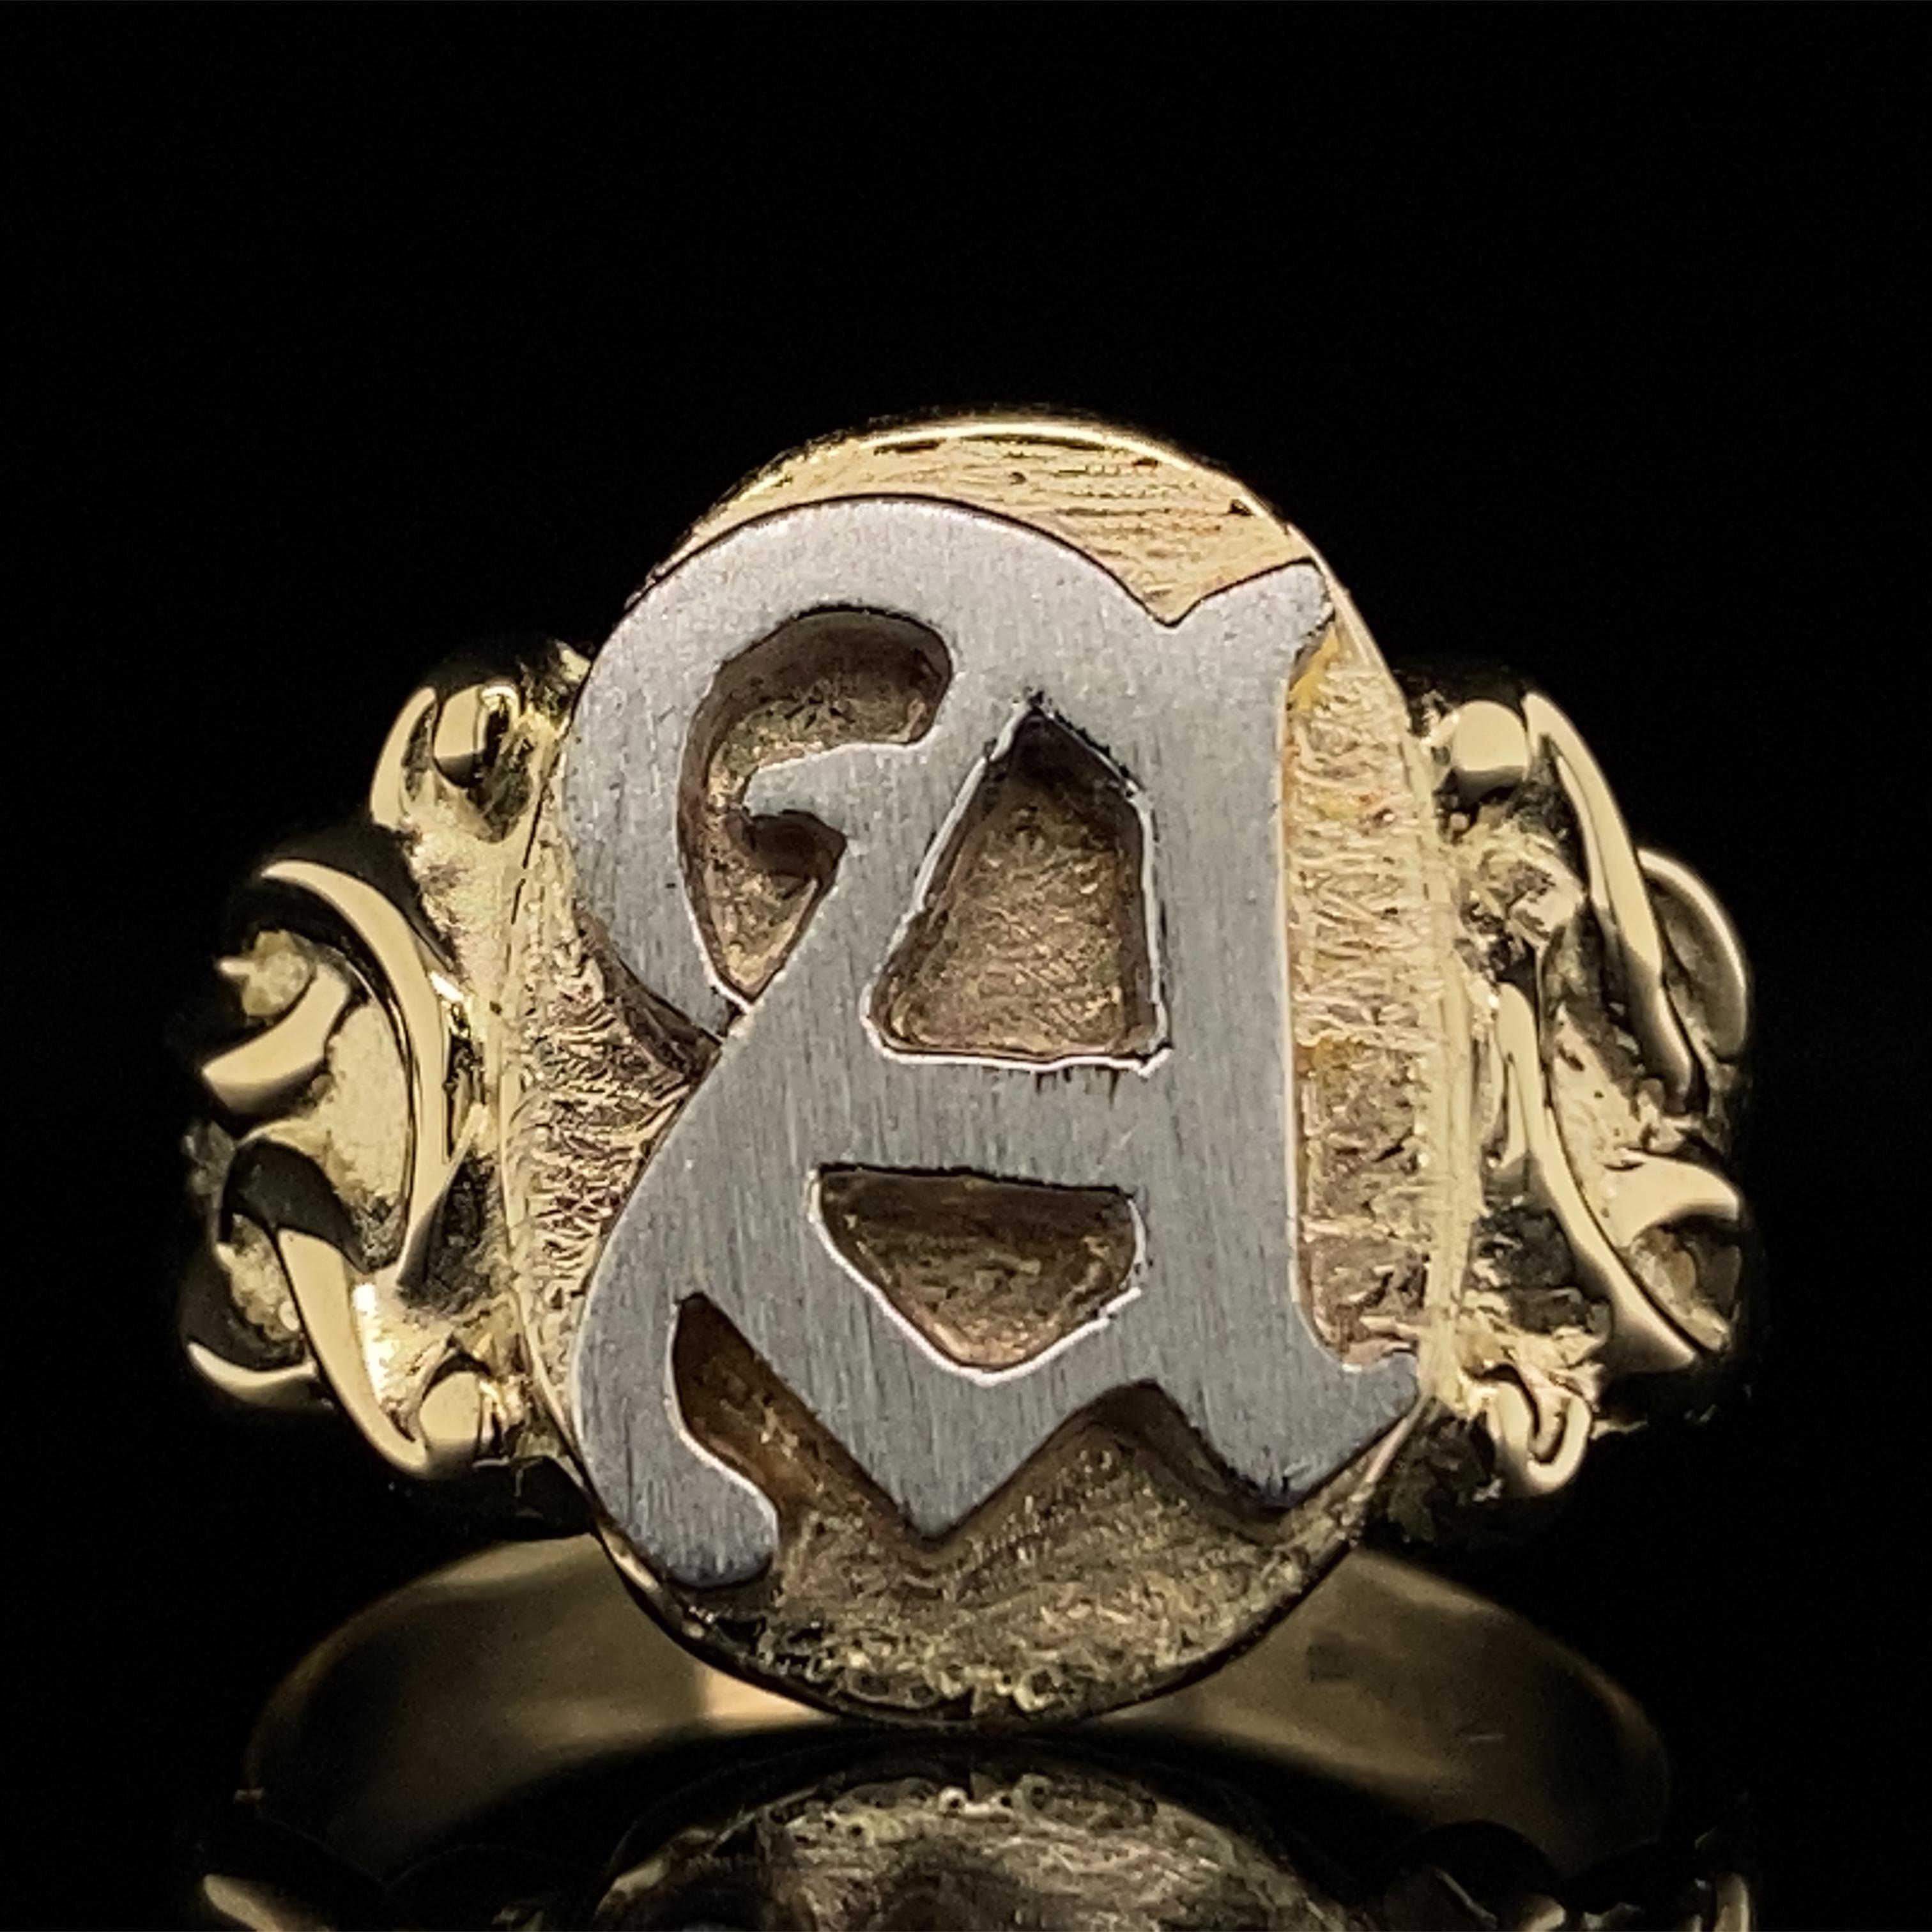 Contemporary Monogram Ring with Olde English Letter 